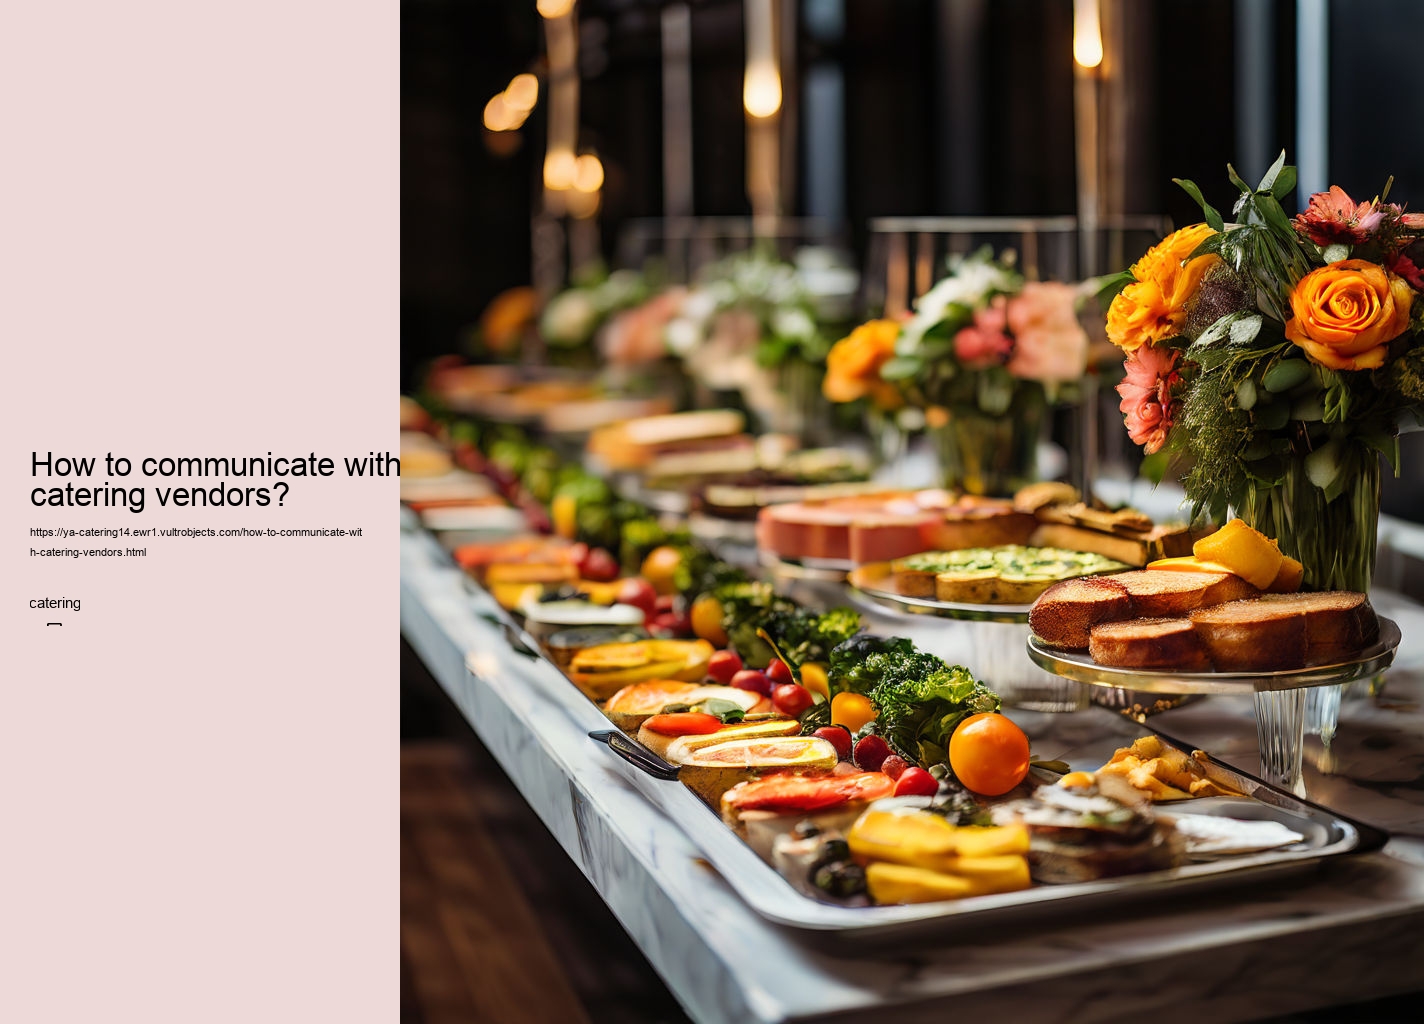 How to communicate with catering vendors?